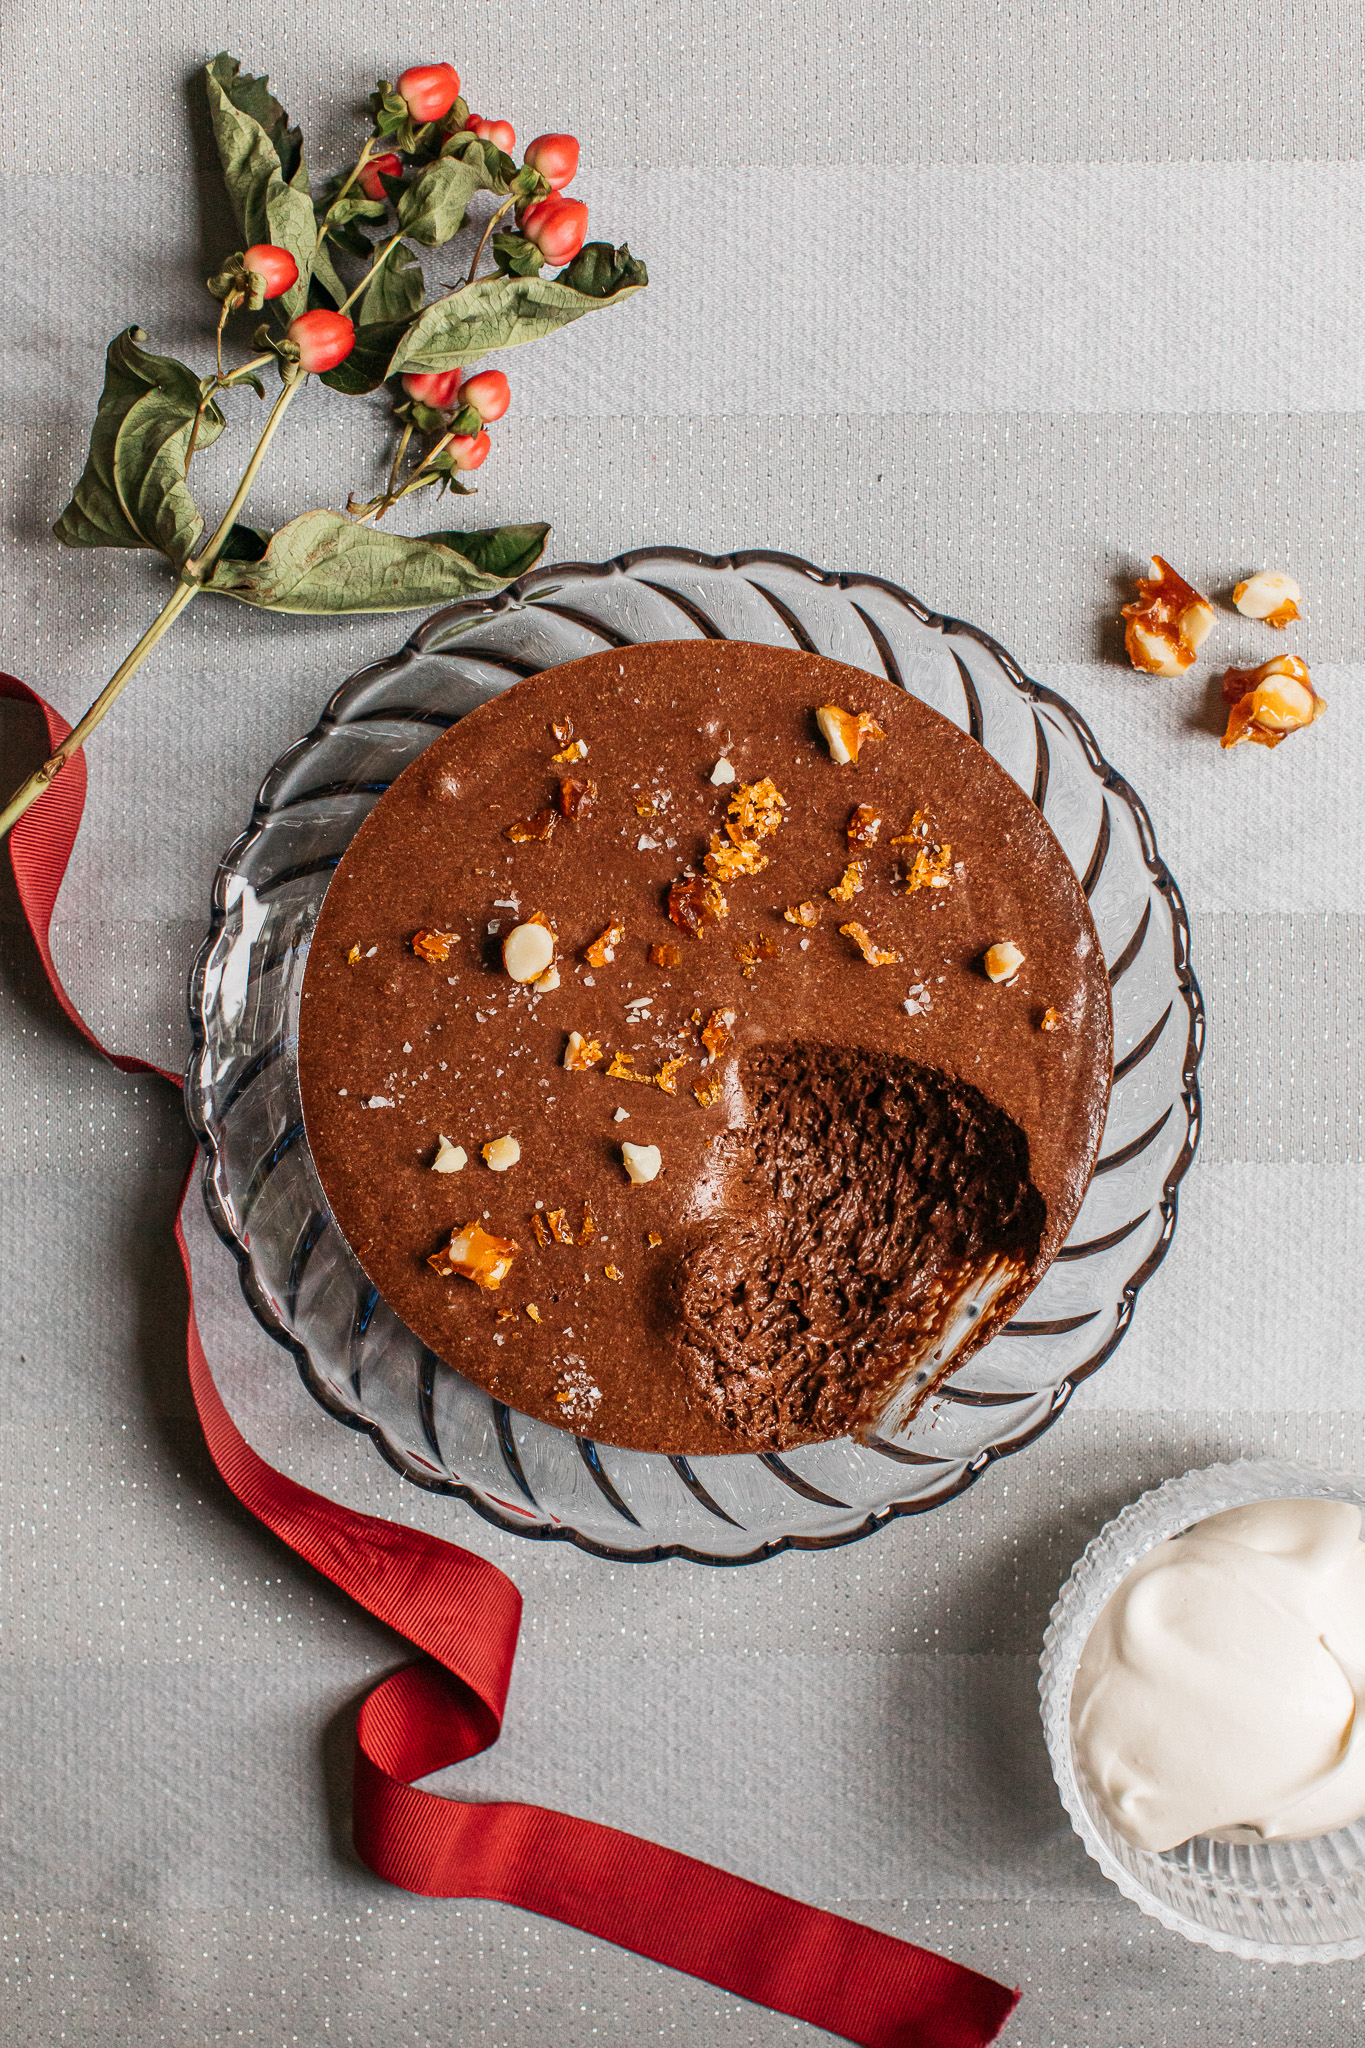 Rich low FODMAP chocolate mousse with macadamia nut brittle